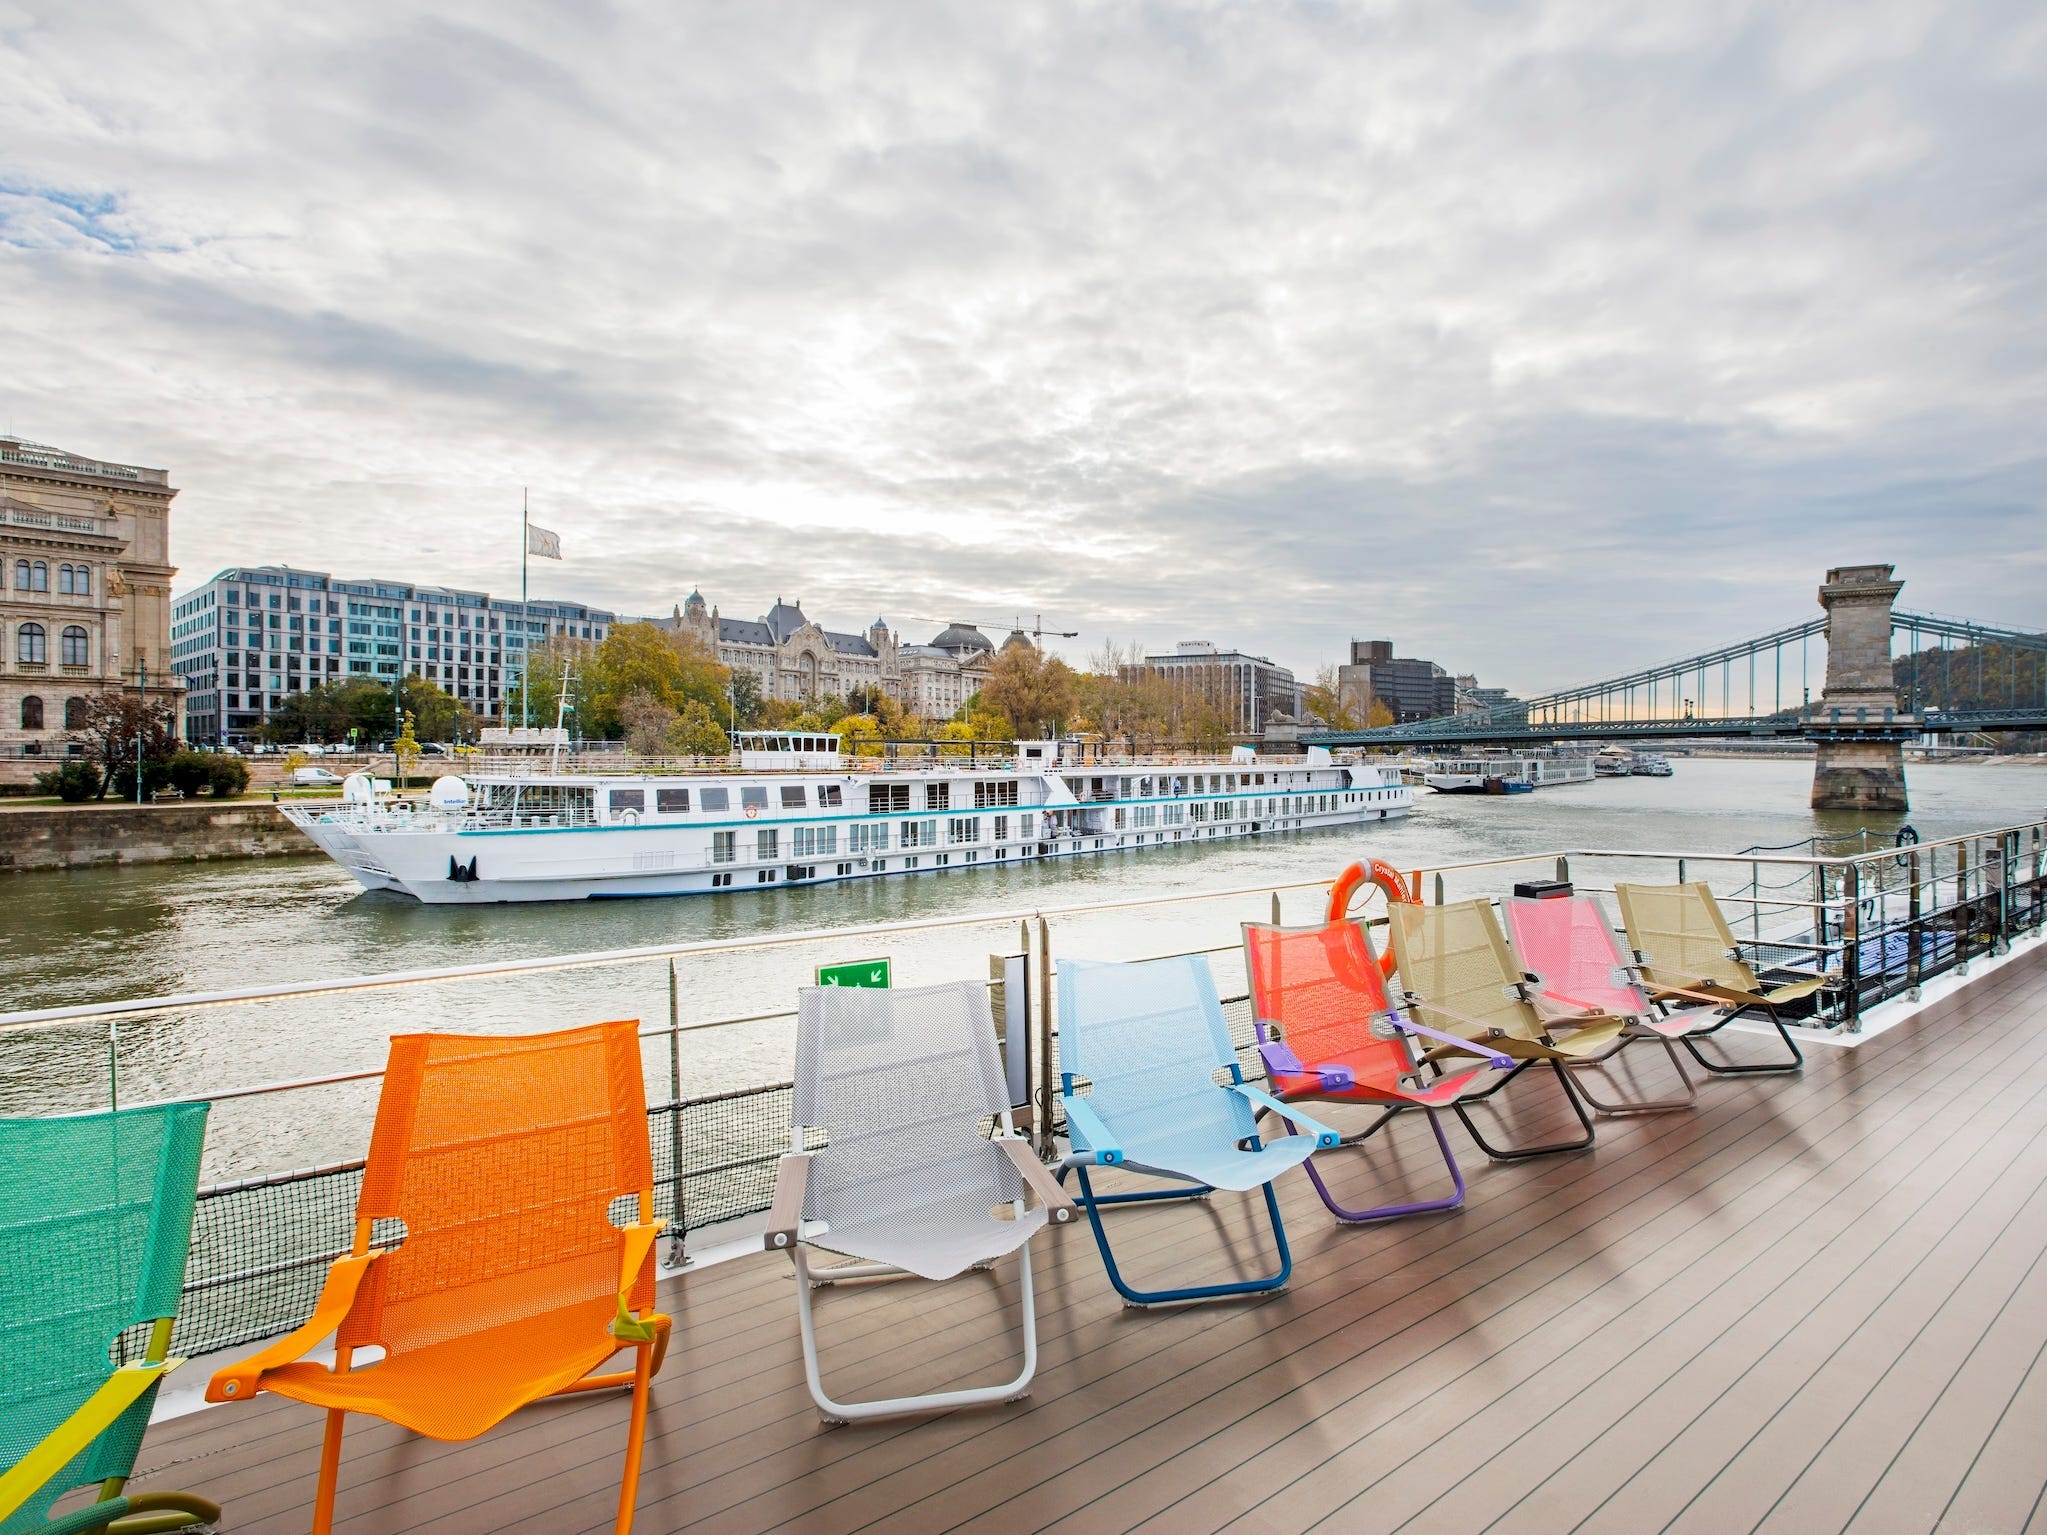 <p>The firm had its sights set on a river cruise venture since 2018, Jen Halboth, CEO of Riverside Luxury Cruises, told Business Insider.</p><p>Ironically, COVID-19 was the reason it got into the business.</p><p><a href="https://www.businessinsider.com/crystal-cruises-141-night-world-cruise-year-after-controversy-photos-2023-4">Crystal Cruises</a> declared bankruptcy in early 2022 amid the pandemic. Shortly after, Seaside purchased and updated five of the then-defunct cruise line's ships.</p><p>Three of these vessels now make up Riverside's fleet. The other two are being leased to competitor Uniworld River Cruises.</p>